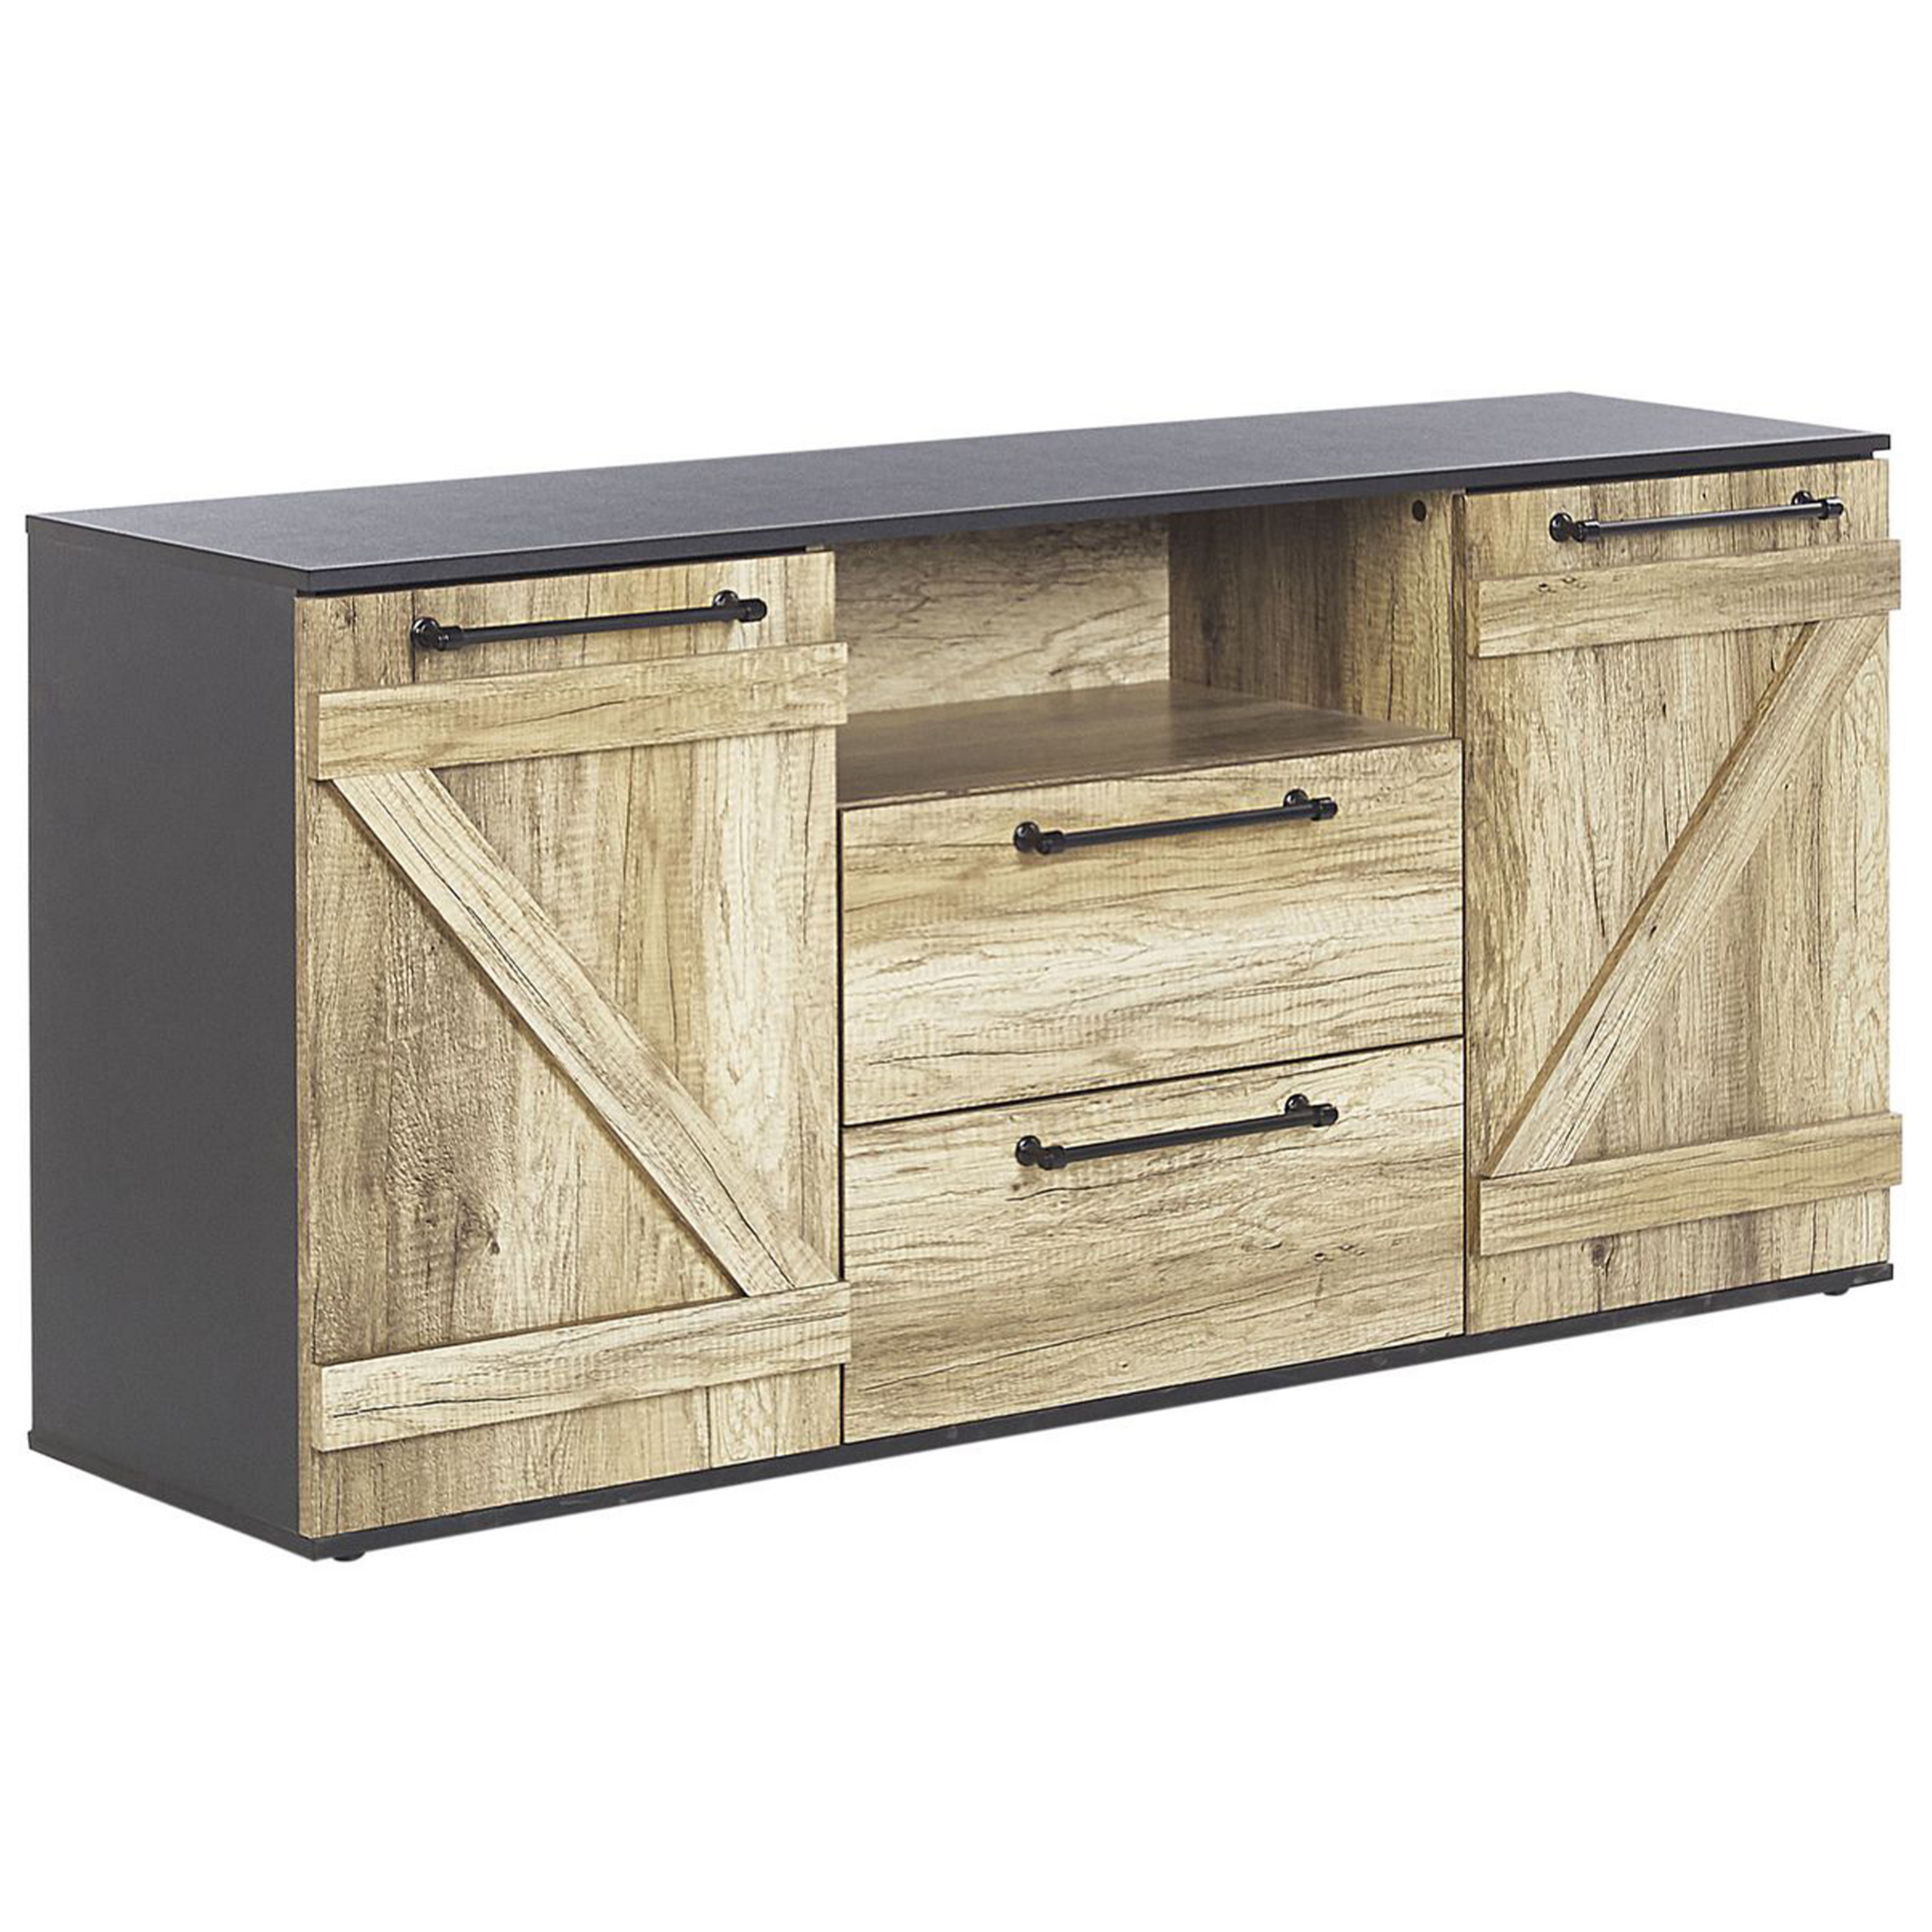 Beliani Sideboard Light Wood and Black Particle Board 72 cm with Drawers Barn Style